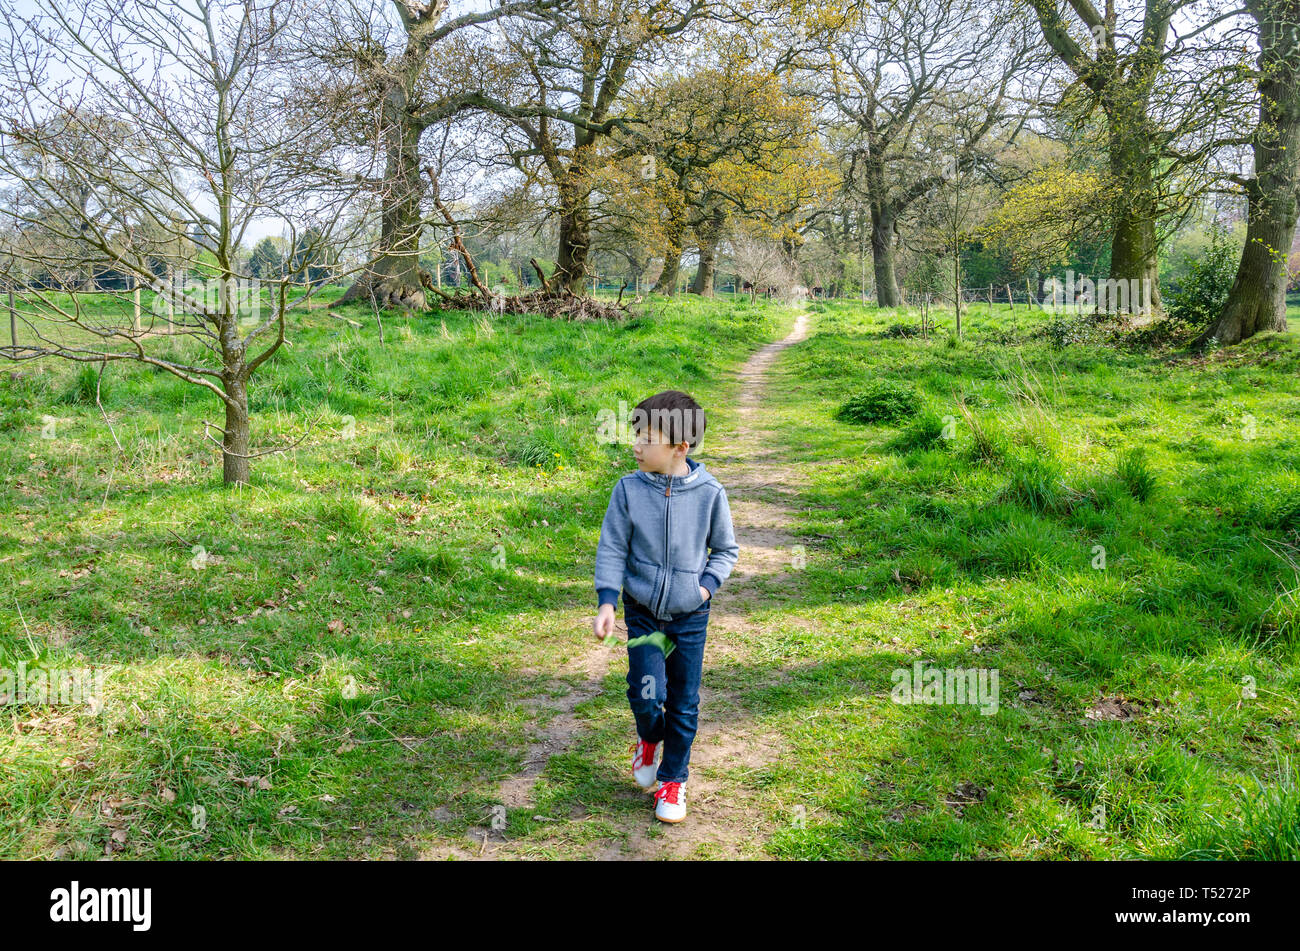 A young boy walking through a clearing in woodland in countryside near the village of Perton in South Staffordshire near Wolverhampton Stock Photo